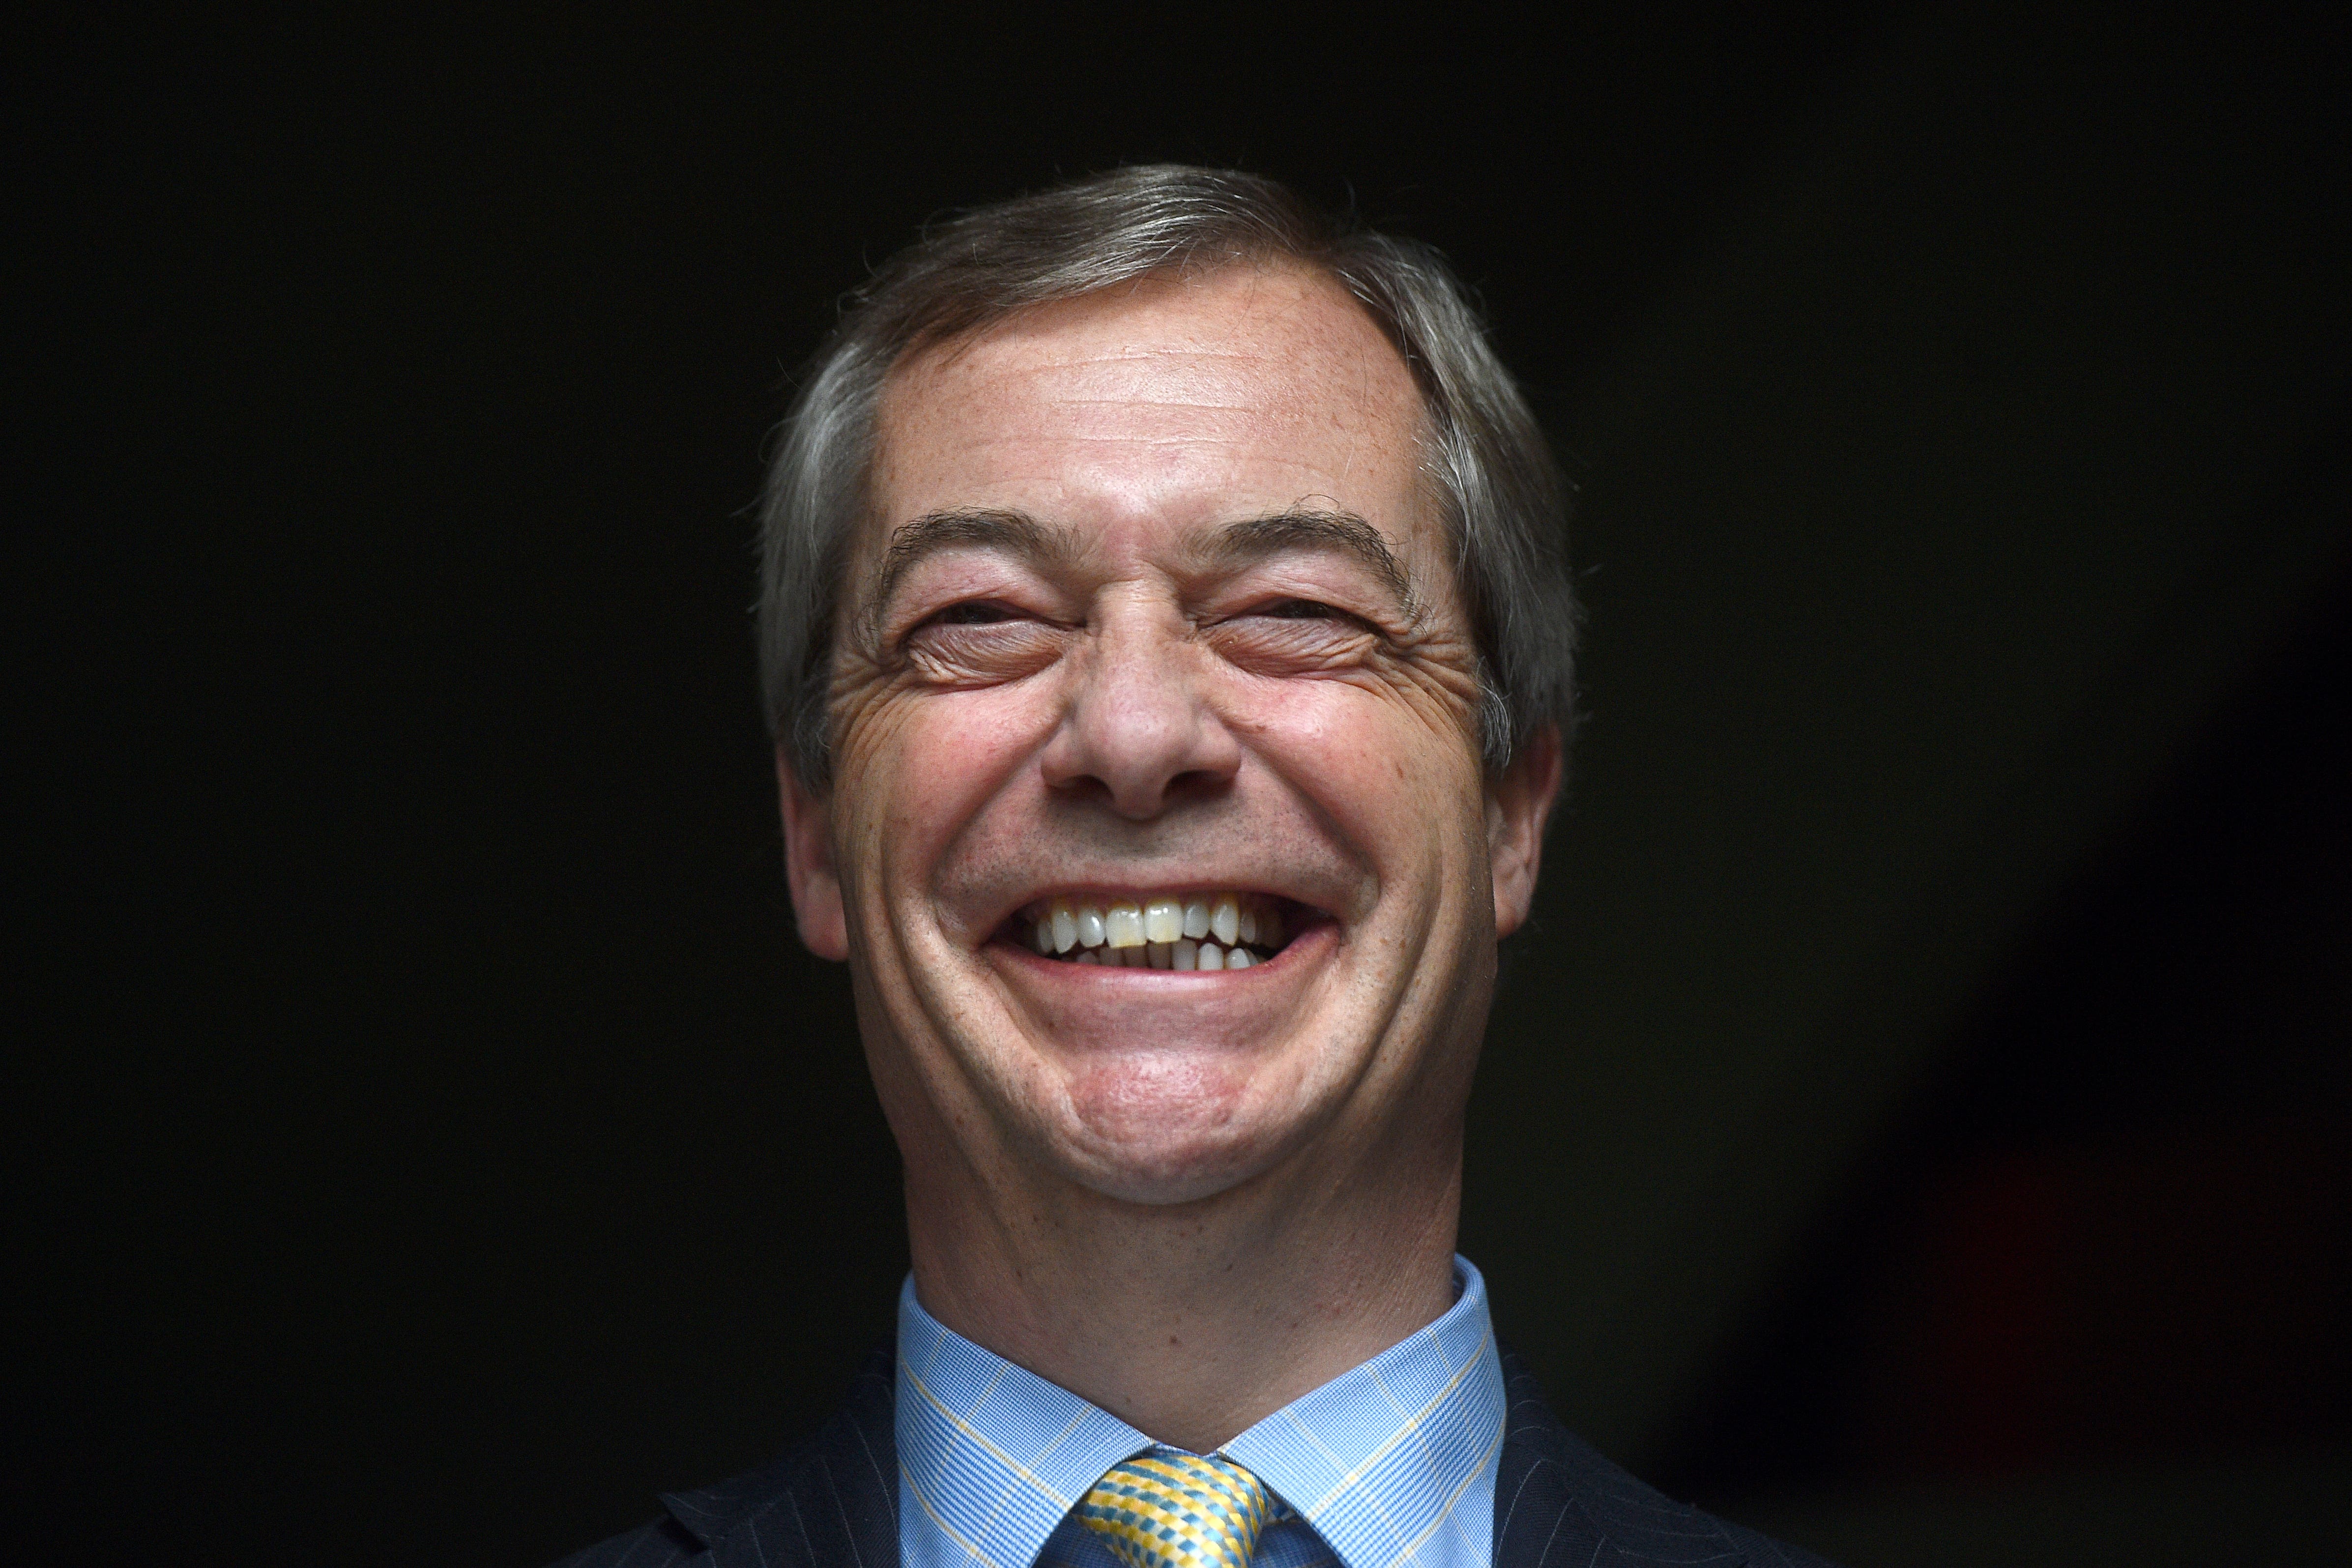 Nigel Farage had pressed for the NatWest boss’s resignation